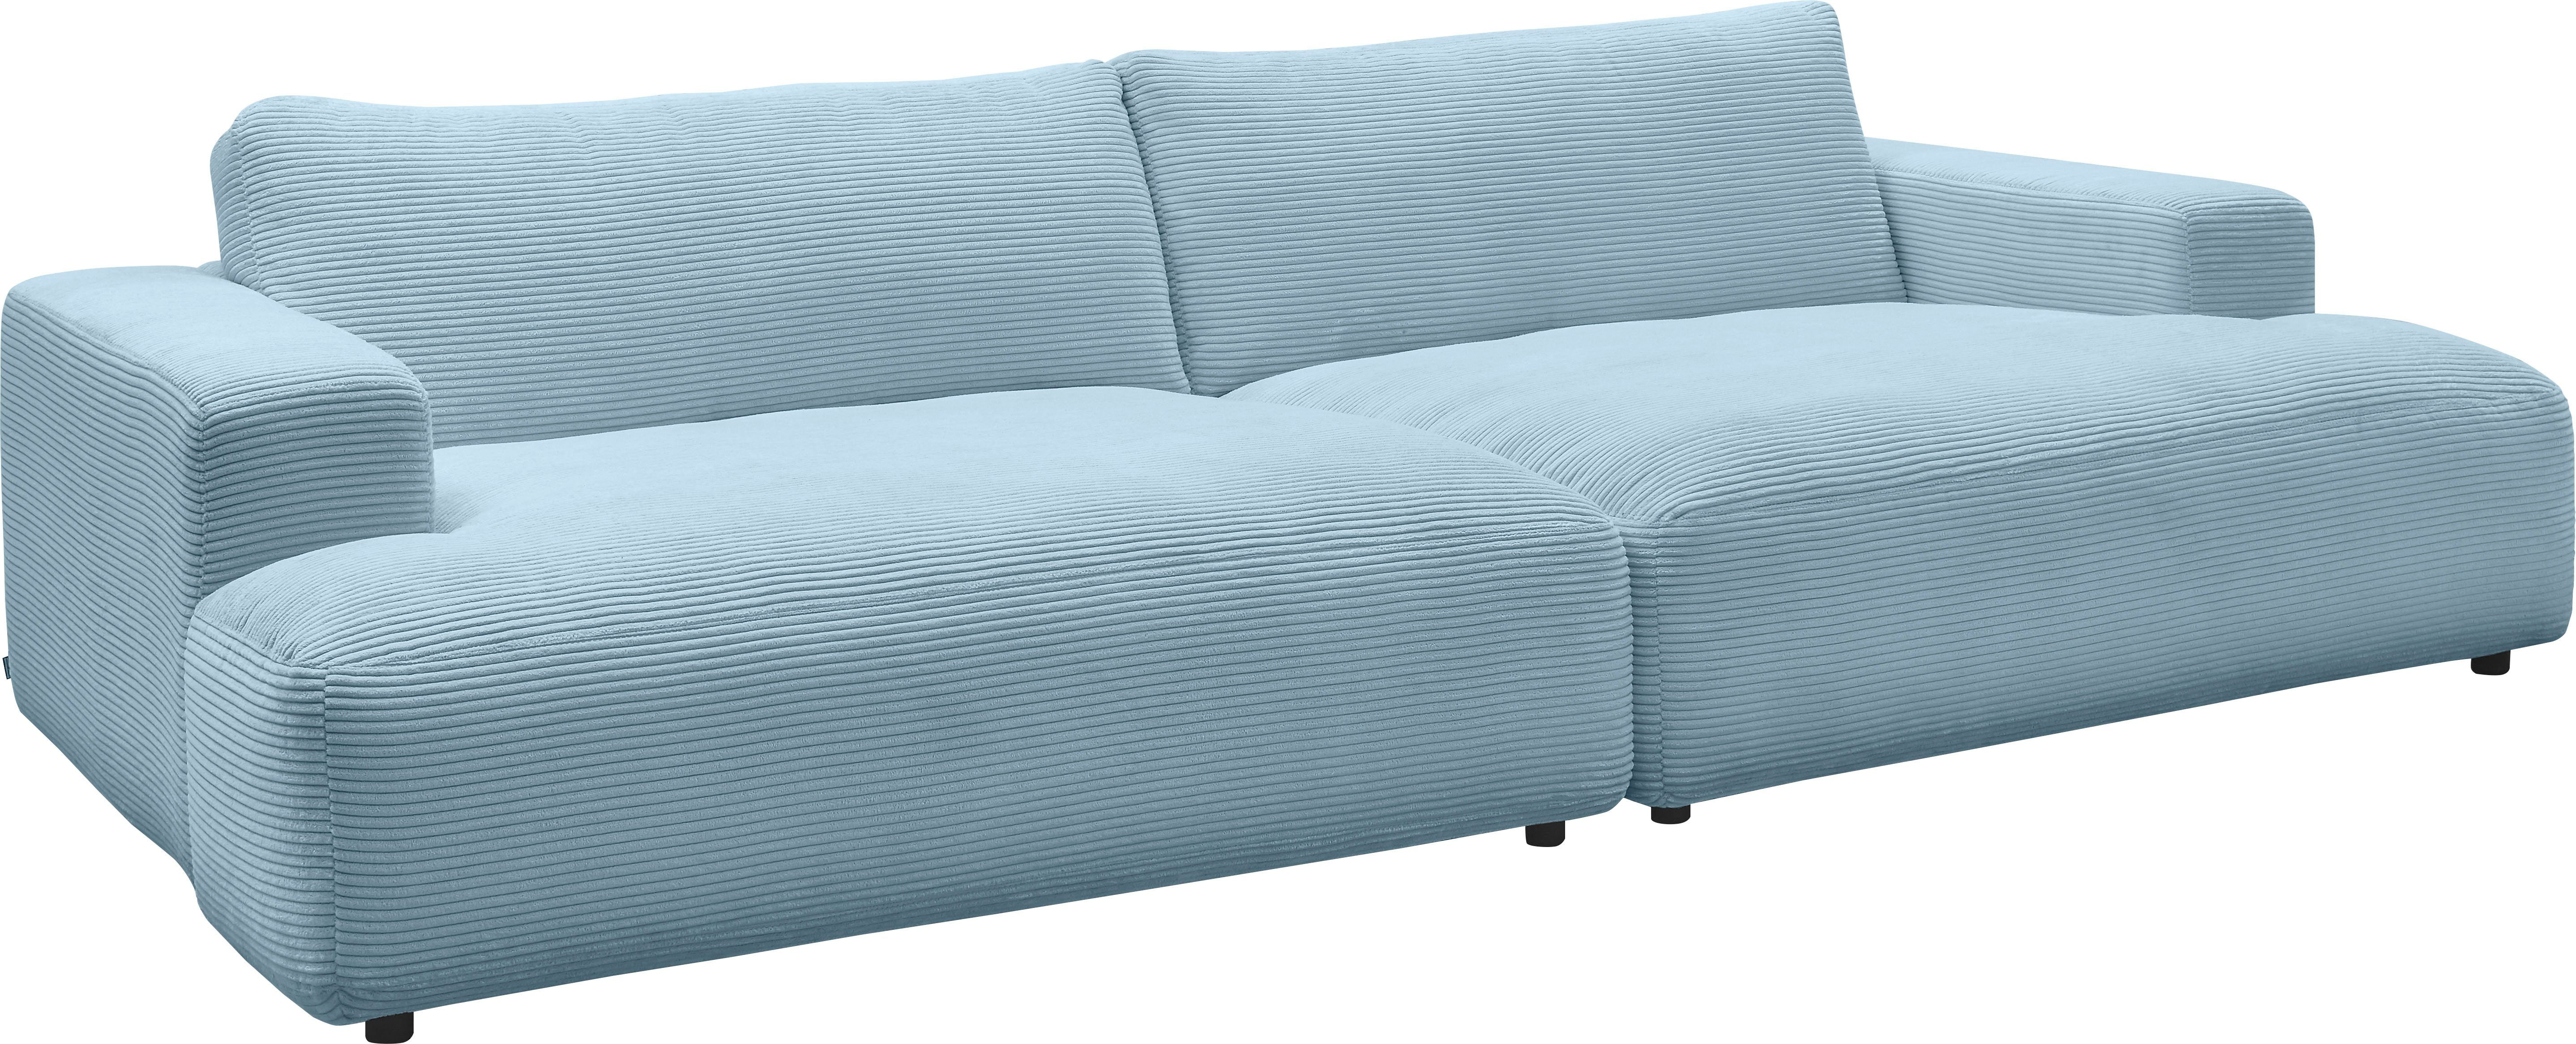 Musterring cm Cord-Bezug, M Lucia, Breite 292 Loungesofa by GALLERY light-blue branded